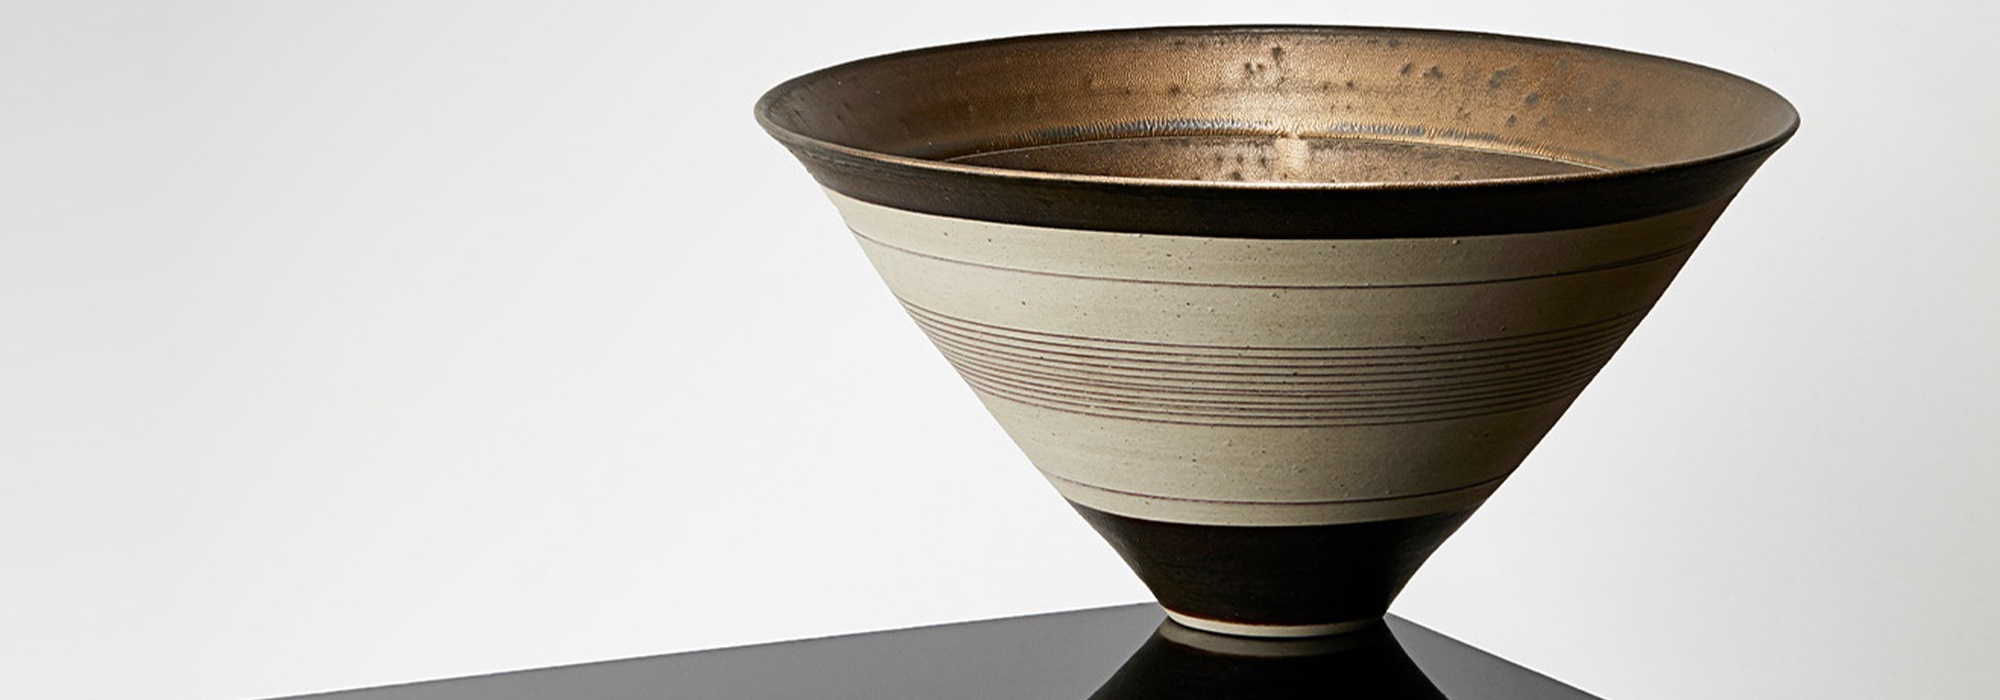 Dame Lucie Rie